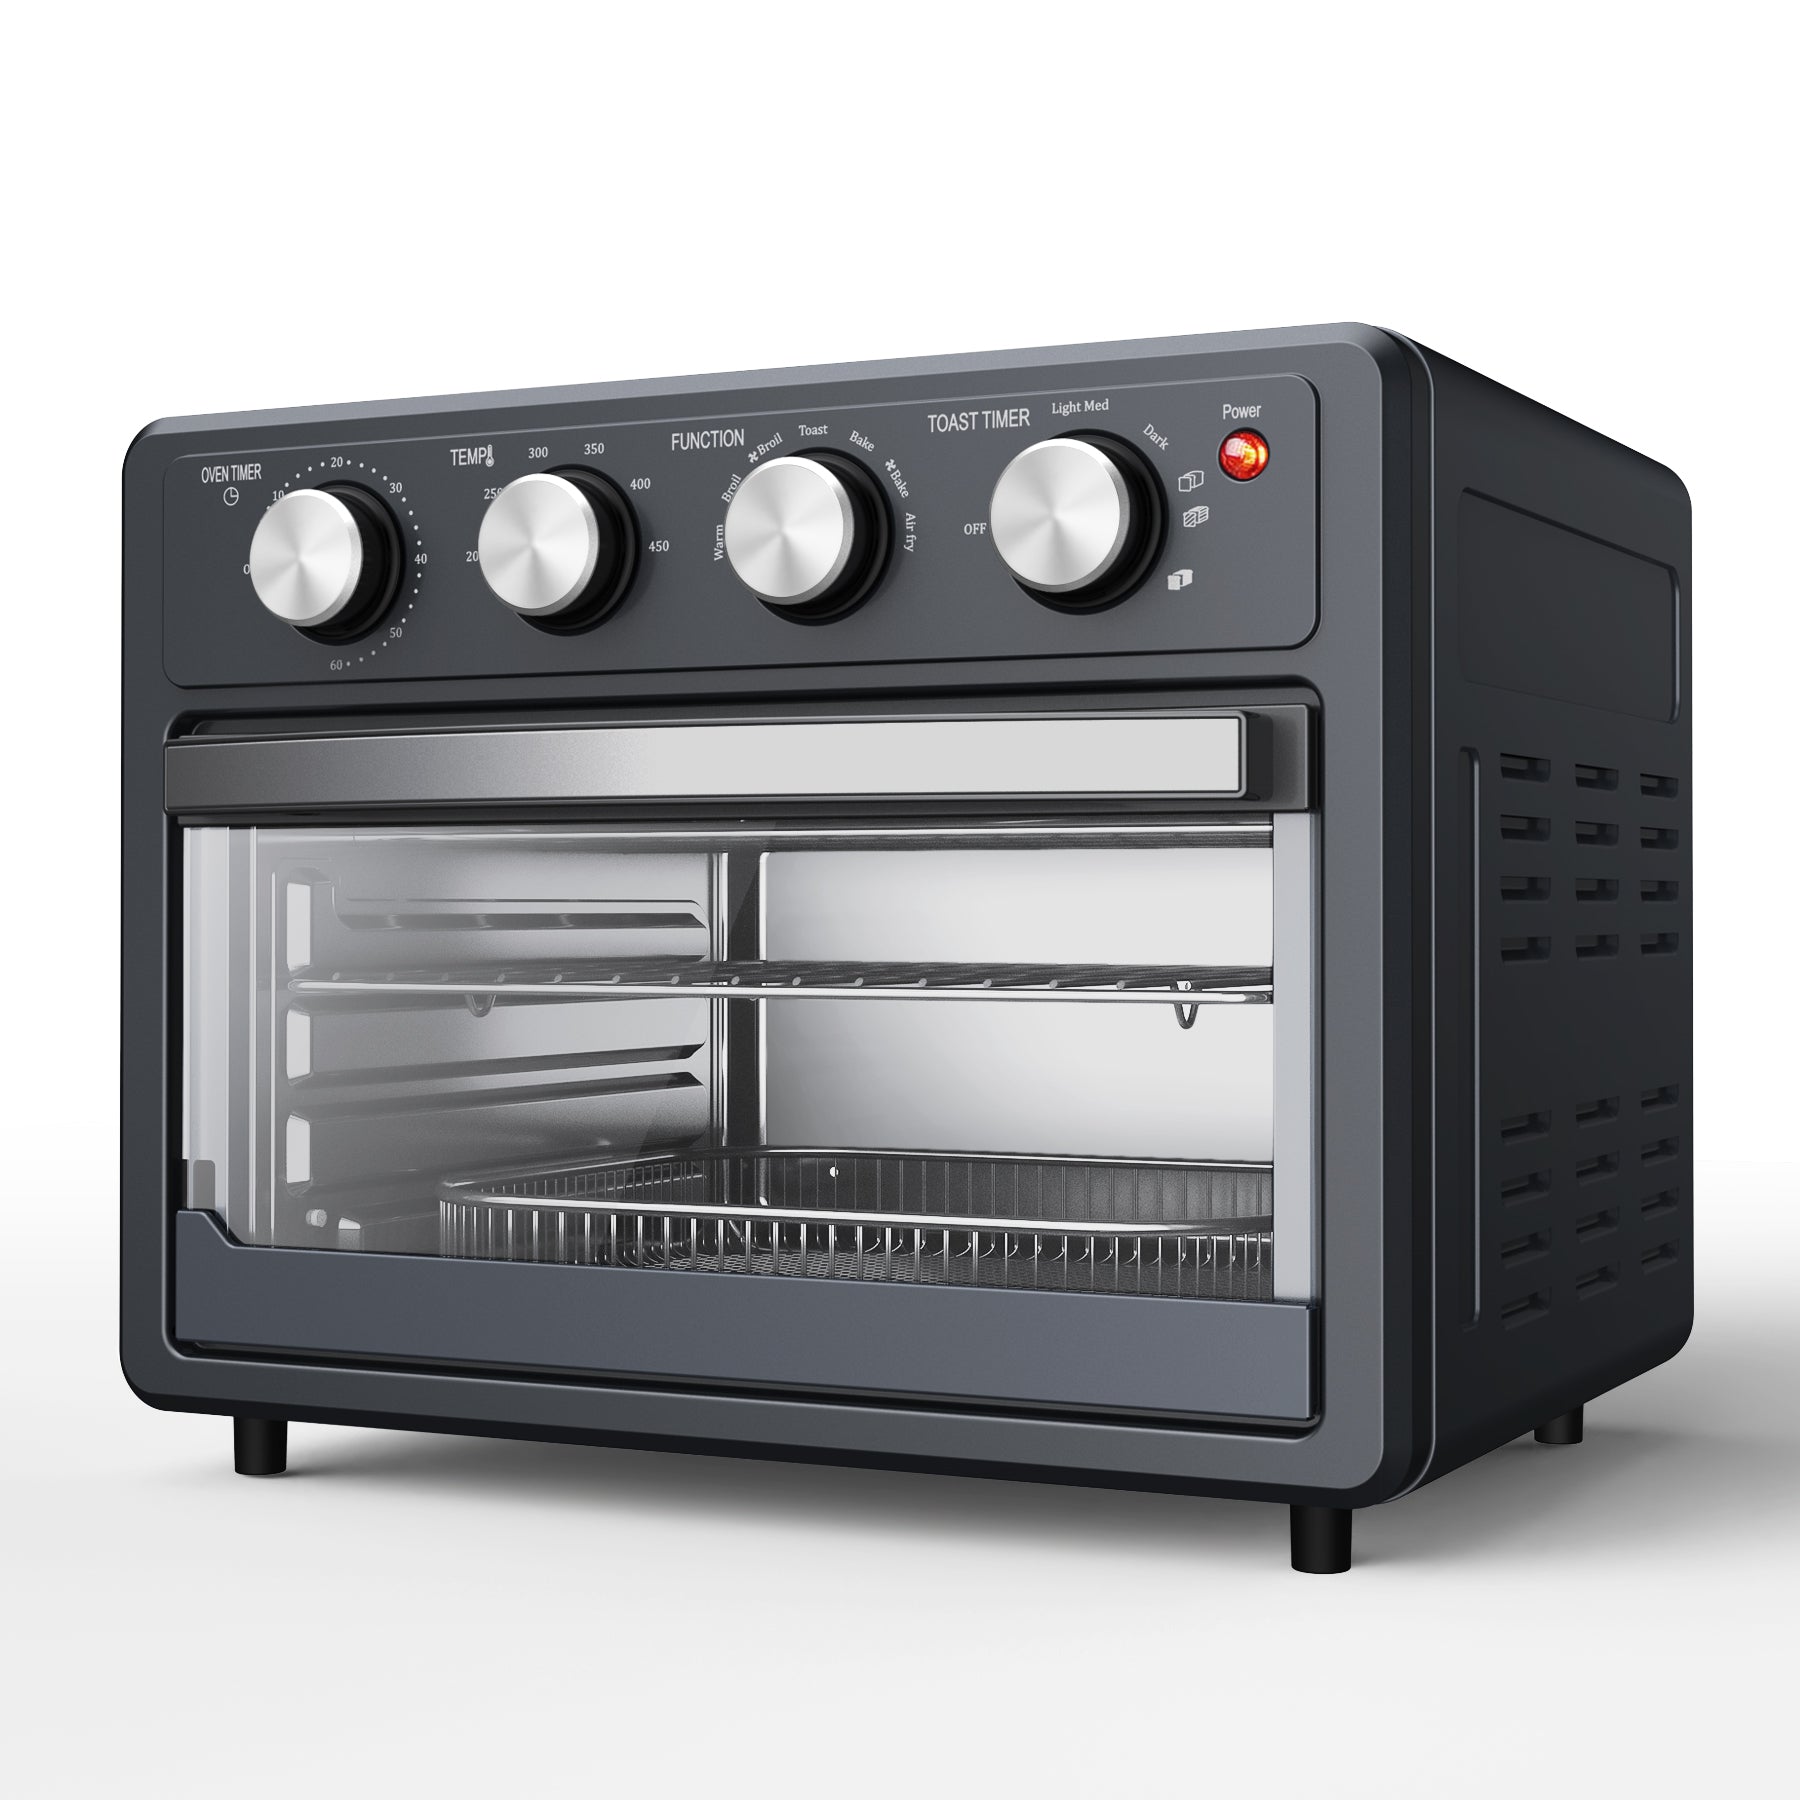 Air Fryer Oven , Countertop Toaster Oven, 3-Rack Levels, 4 mechinical  knobs，Black housing with single glass door(24 QT 1700W) - Bed Bath & Beyond  - 36544248